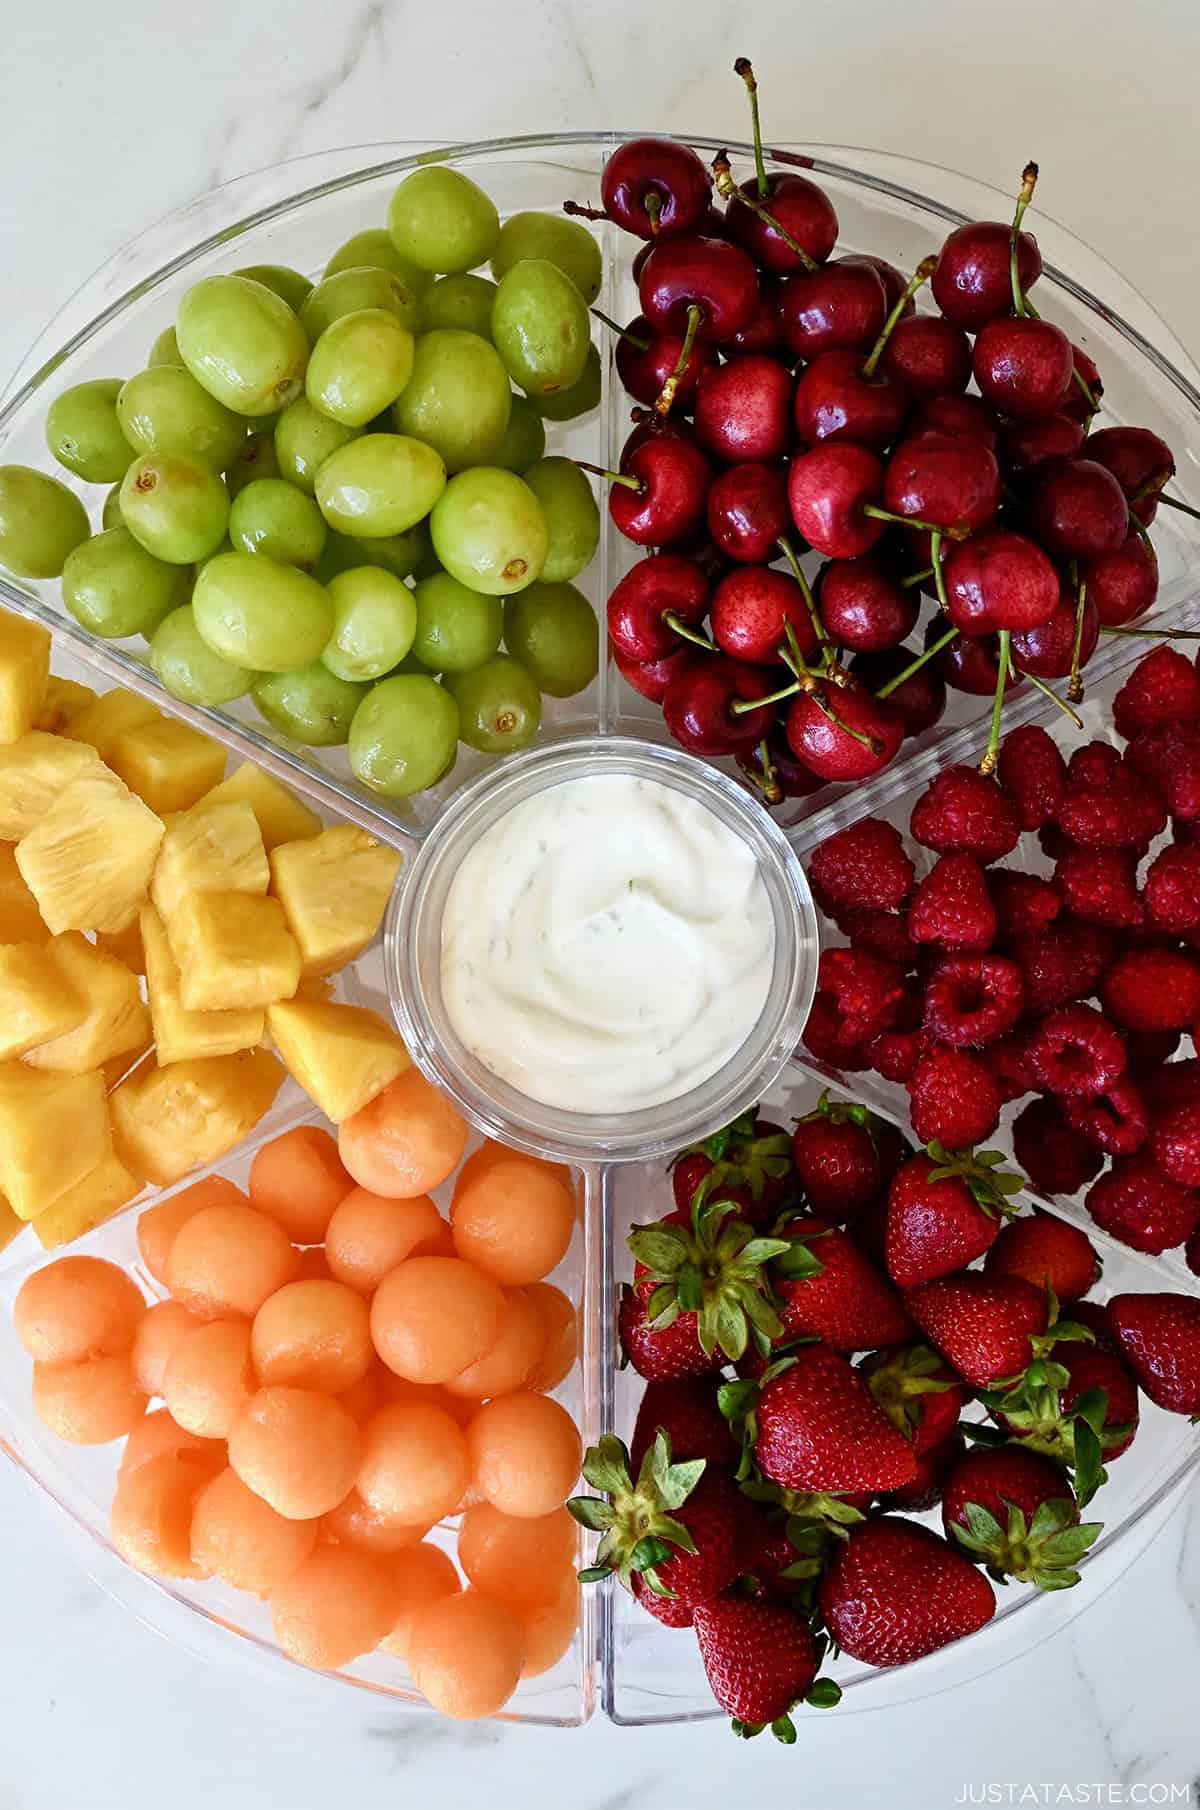 A serving tray with six compartments filled with green grapes, cherries, raspberries, strawberries, cantaloupe balls and chopped pineapple. A small bowl in the center is filled with yogurt.